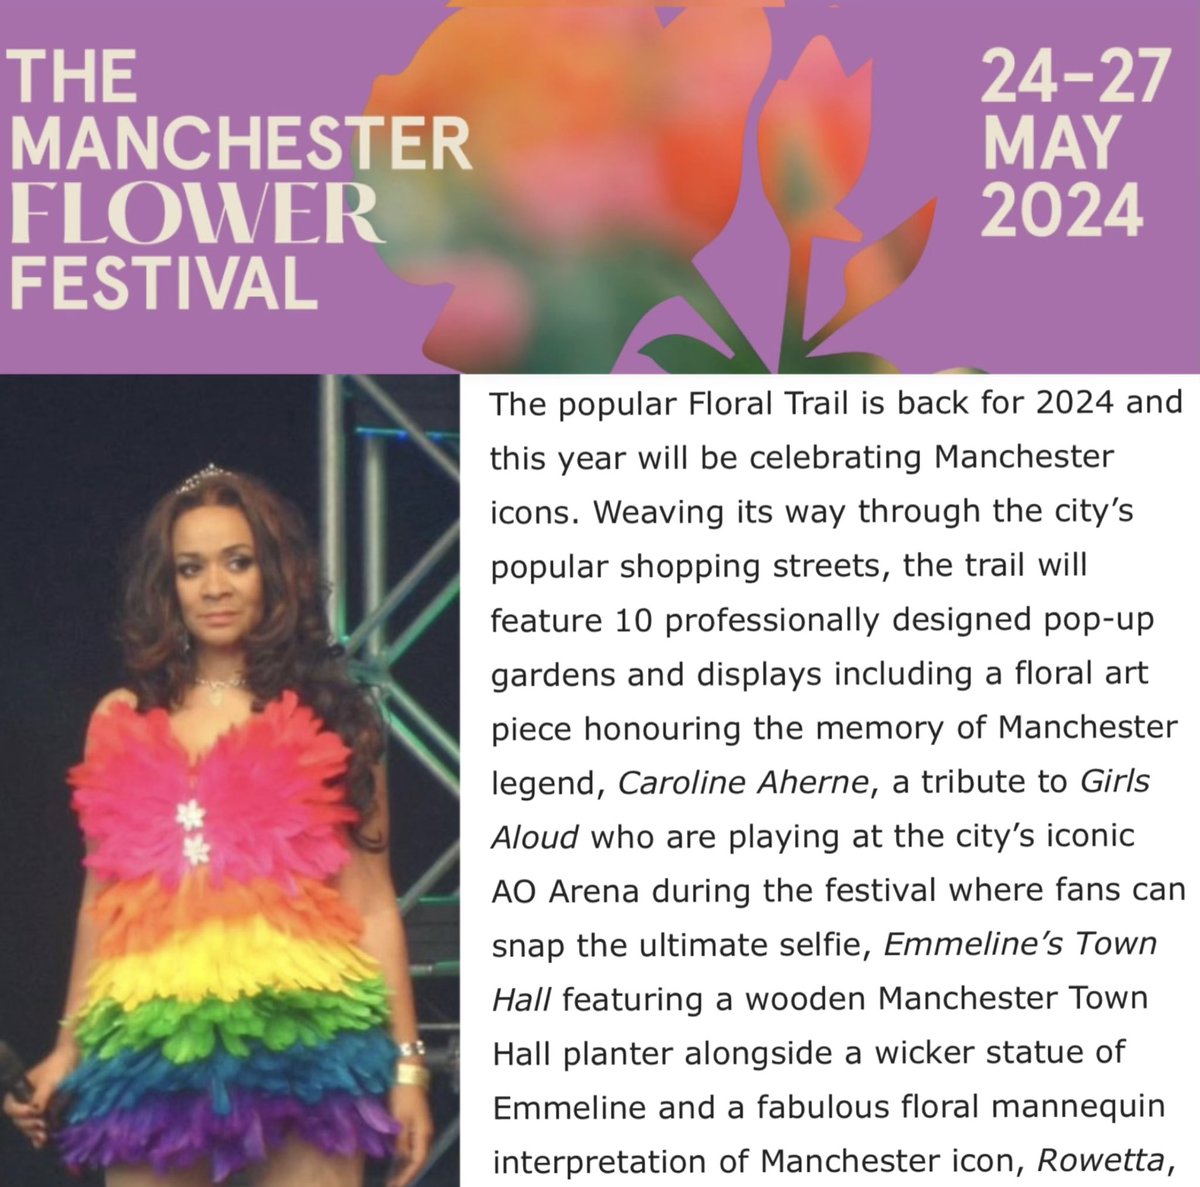 🌸 Celebrate the start of summer at The Manchester Flower Festival 🌹 Friday 24 - Monday 27 May 2024 🐝 Queen Bee Rowetta By Royal Exchange Flowers and The Royal Exchange Manchester 🌼 Thanks to @MCRFlowerFest Visit mcrflowerfest.com 🌺 A beautiful honour ❤️